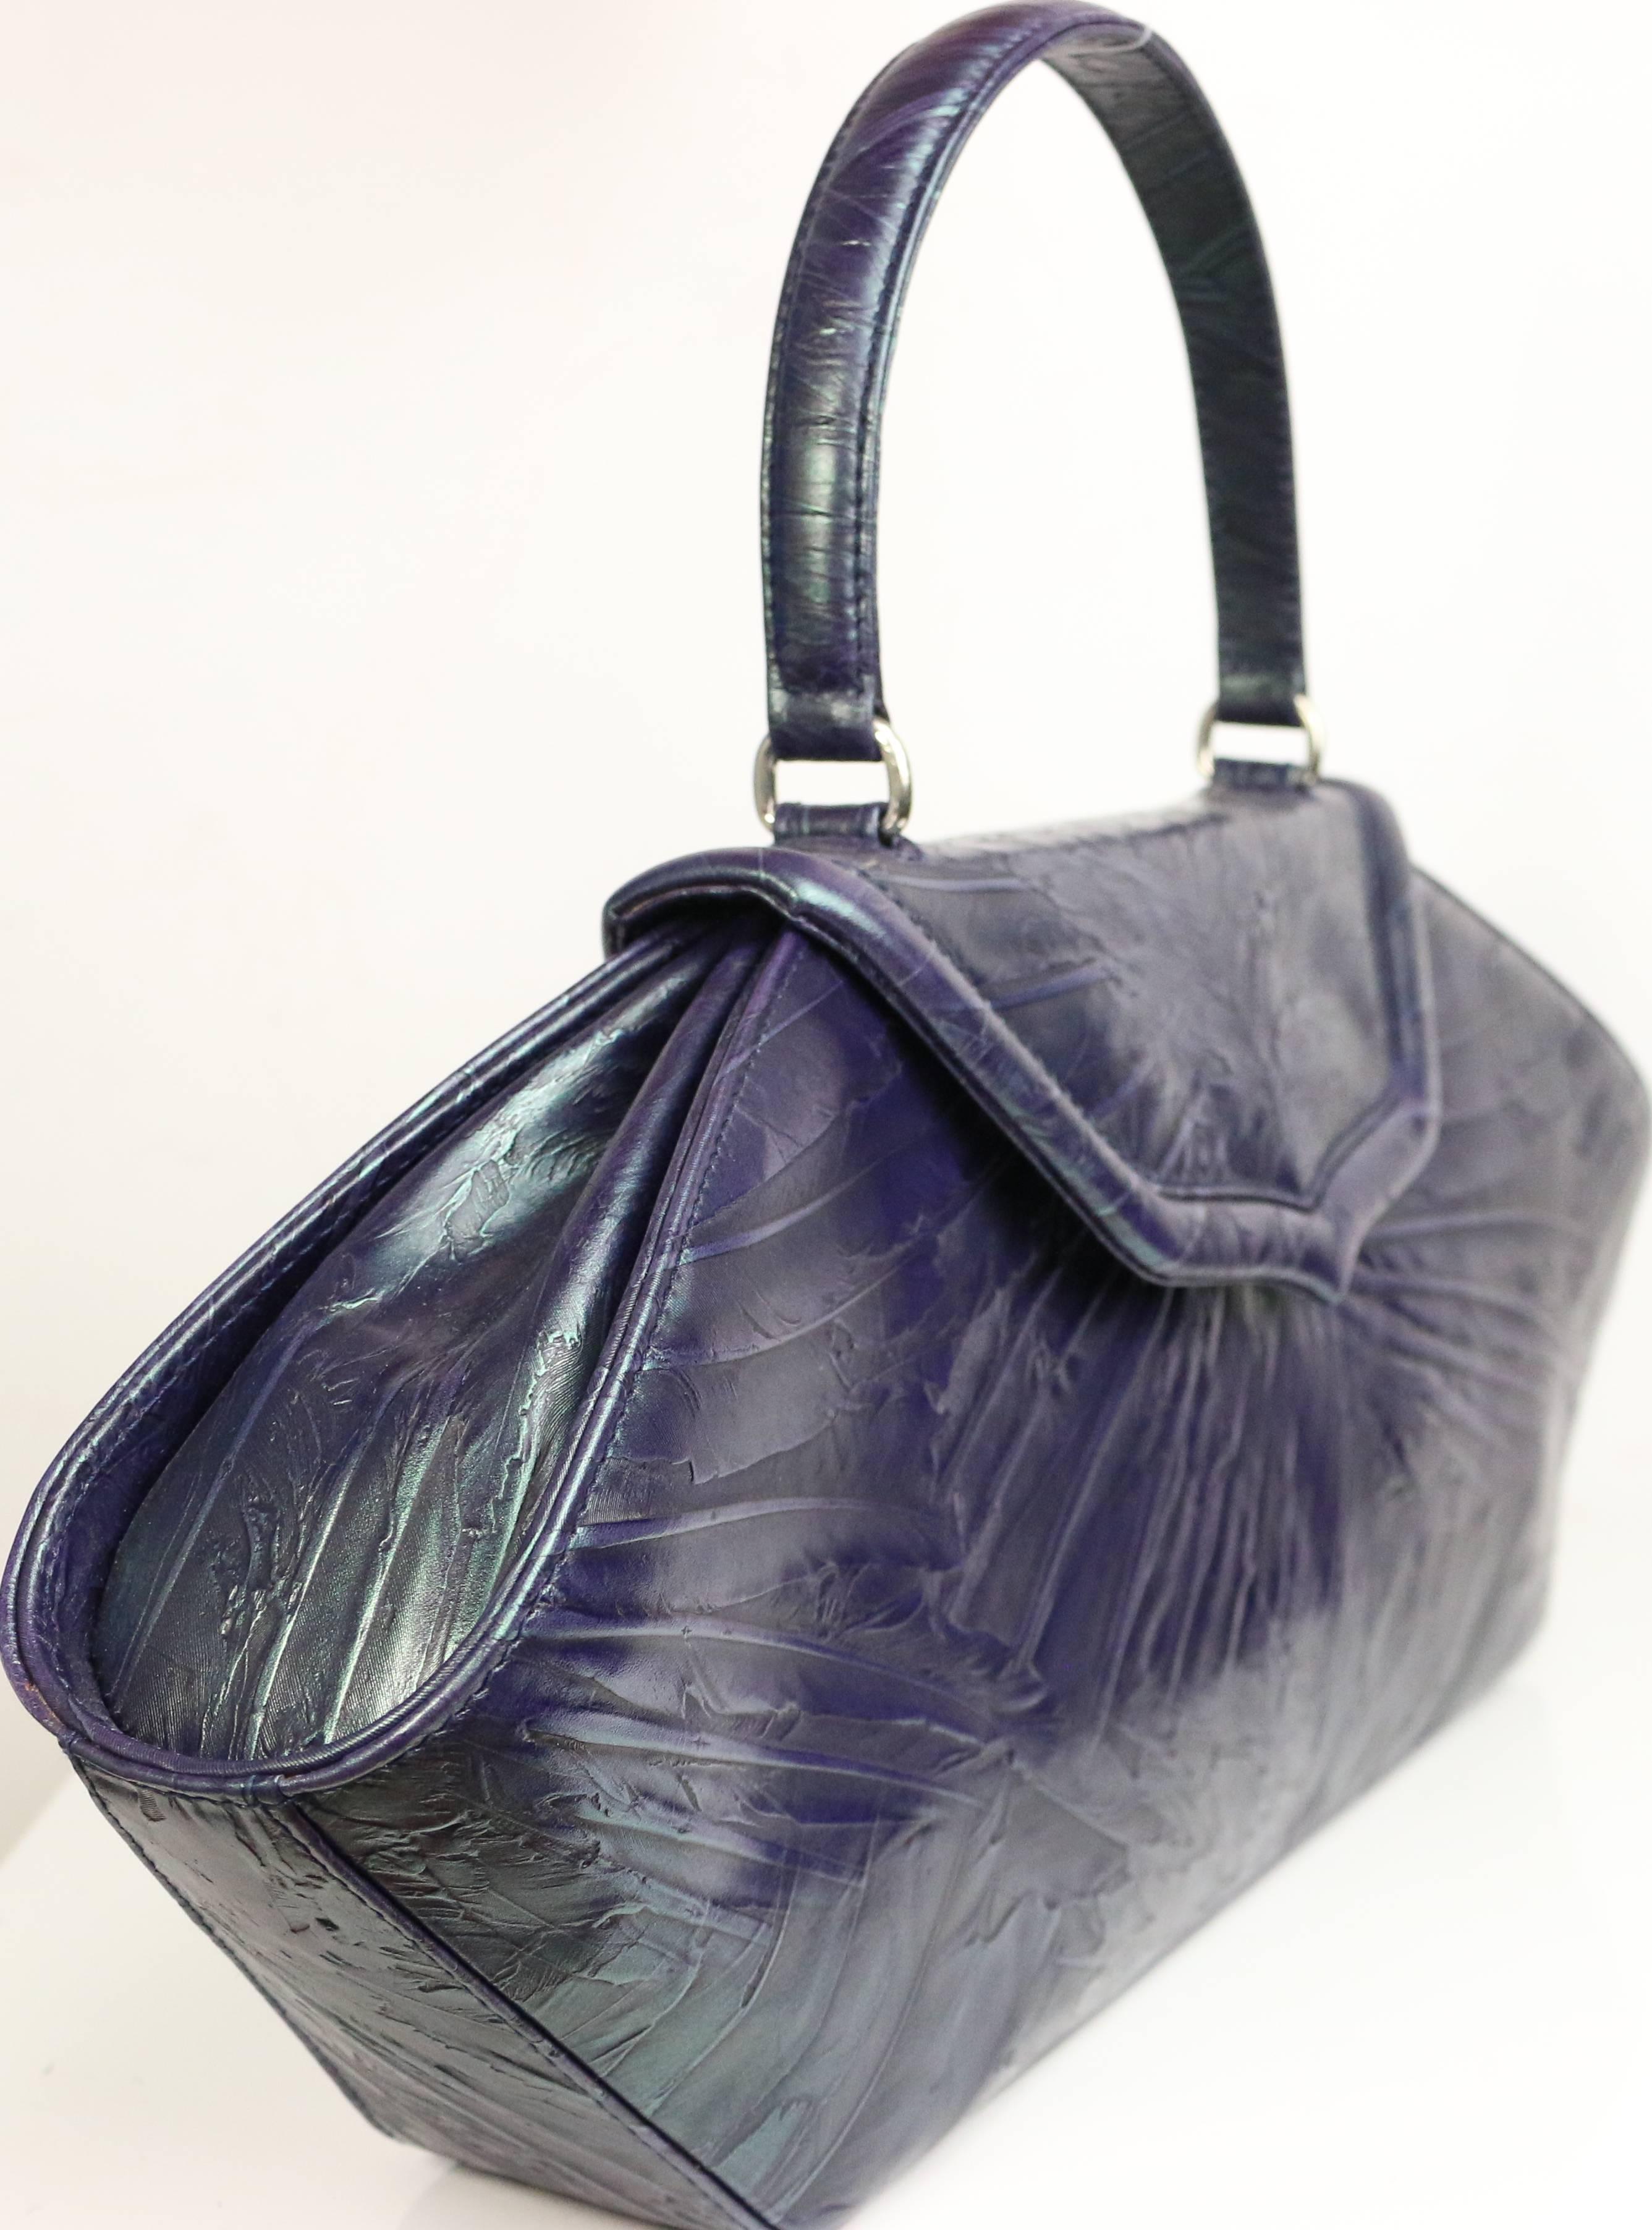 - Vintage 90s Philip Treacy octagon leather handbag. 

- Length: 16 inches. Height: 11.5 inches. 

- Made in London 